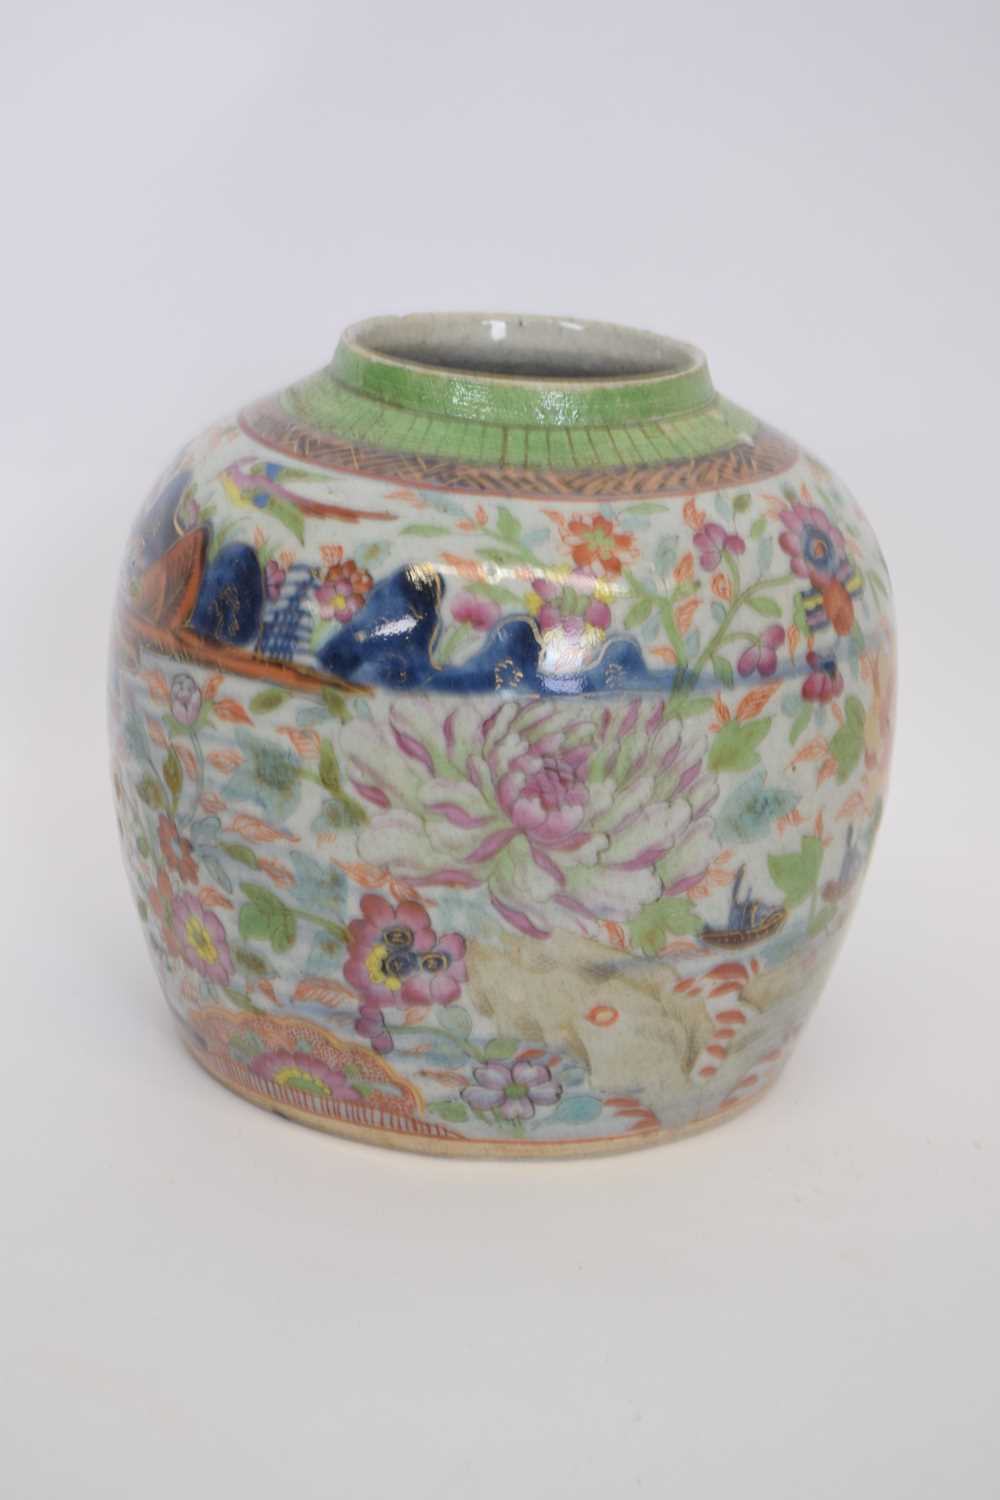 Late 18th/early 19th century Chinese porcelain ginger jar with overglaze European decoration - Image 3 of 6